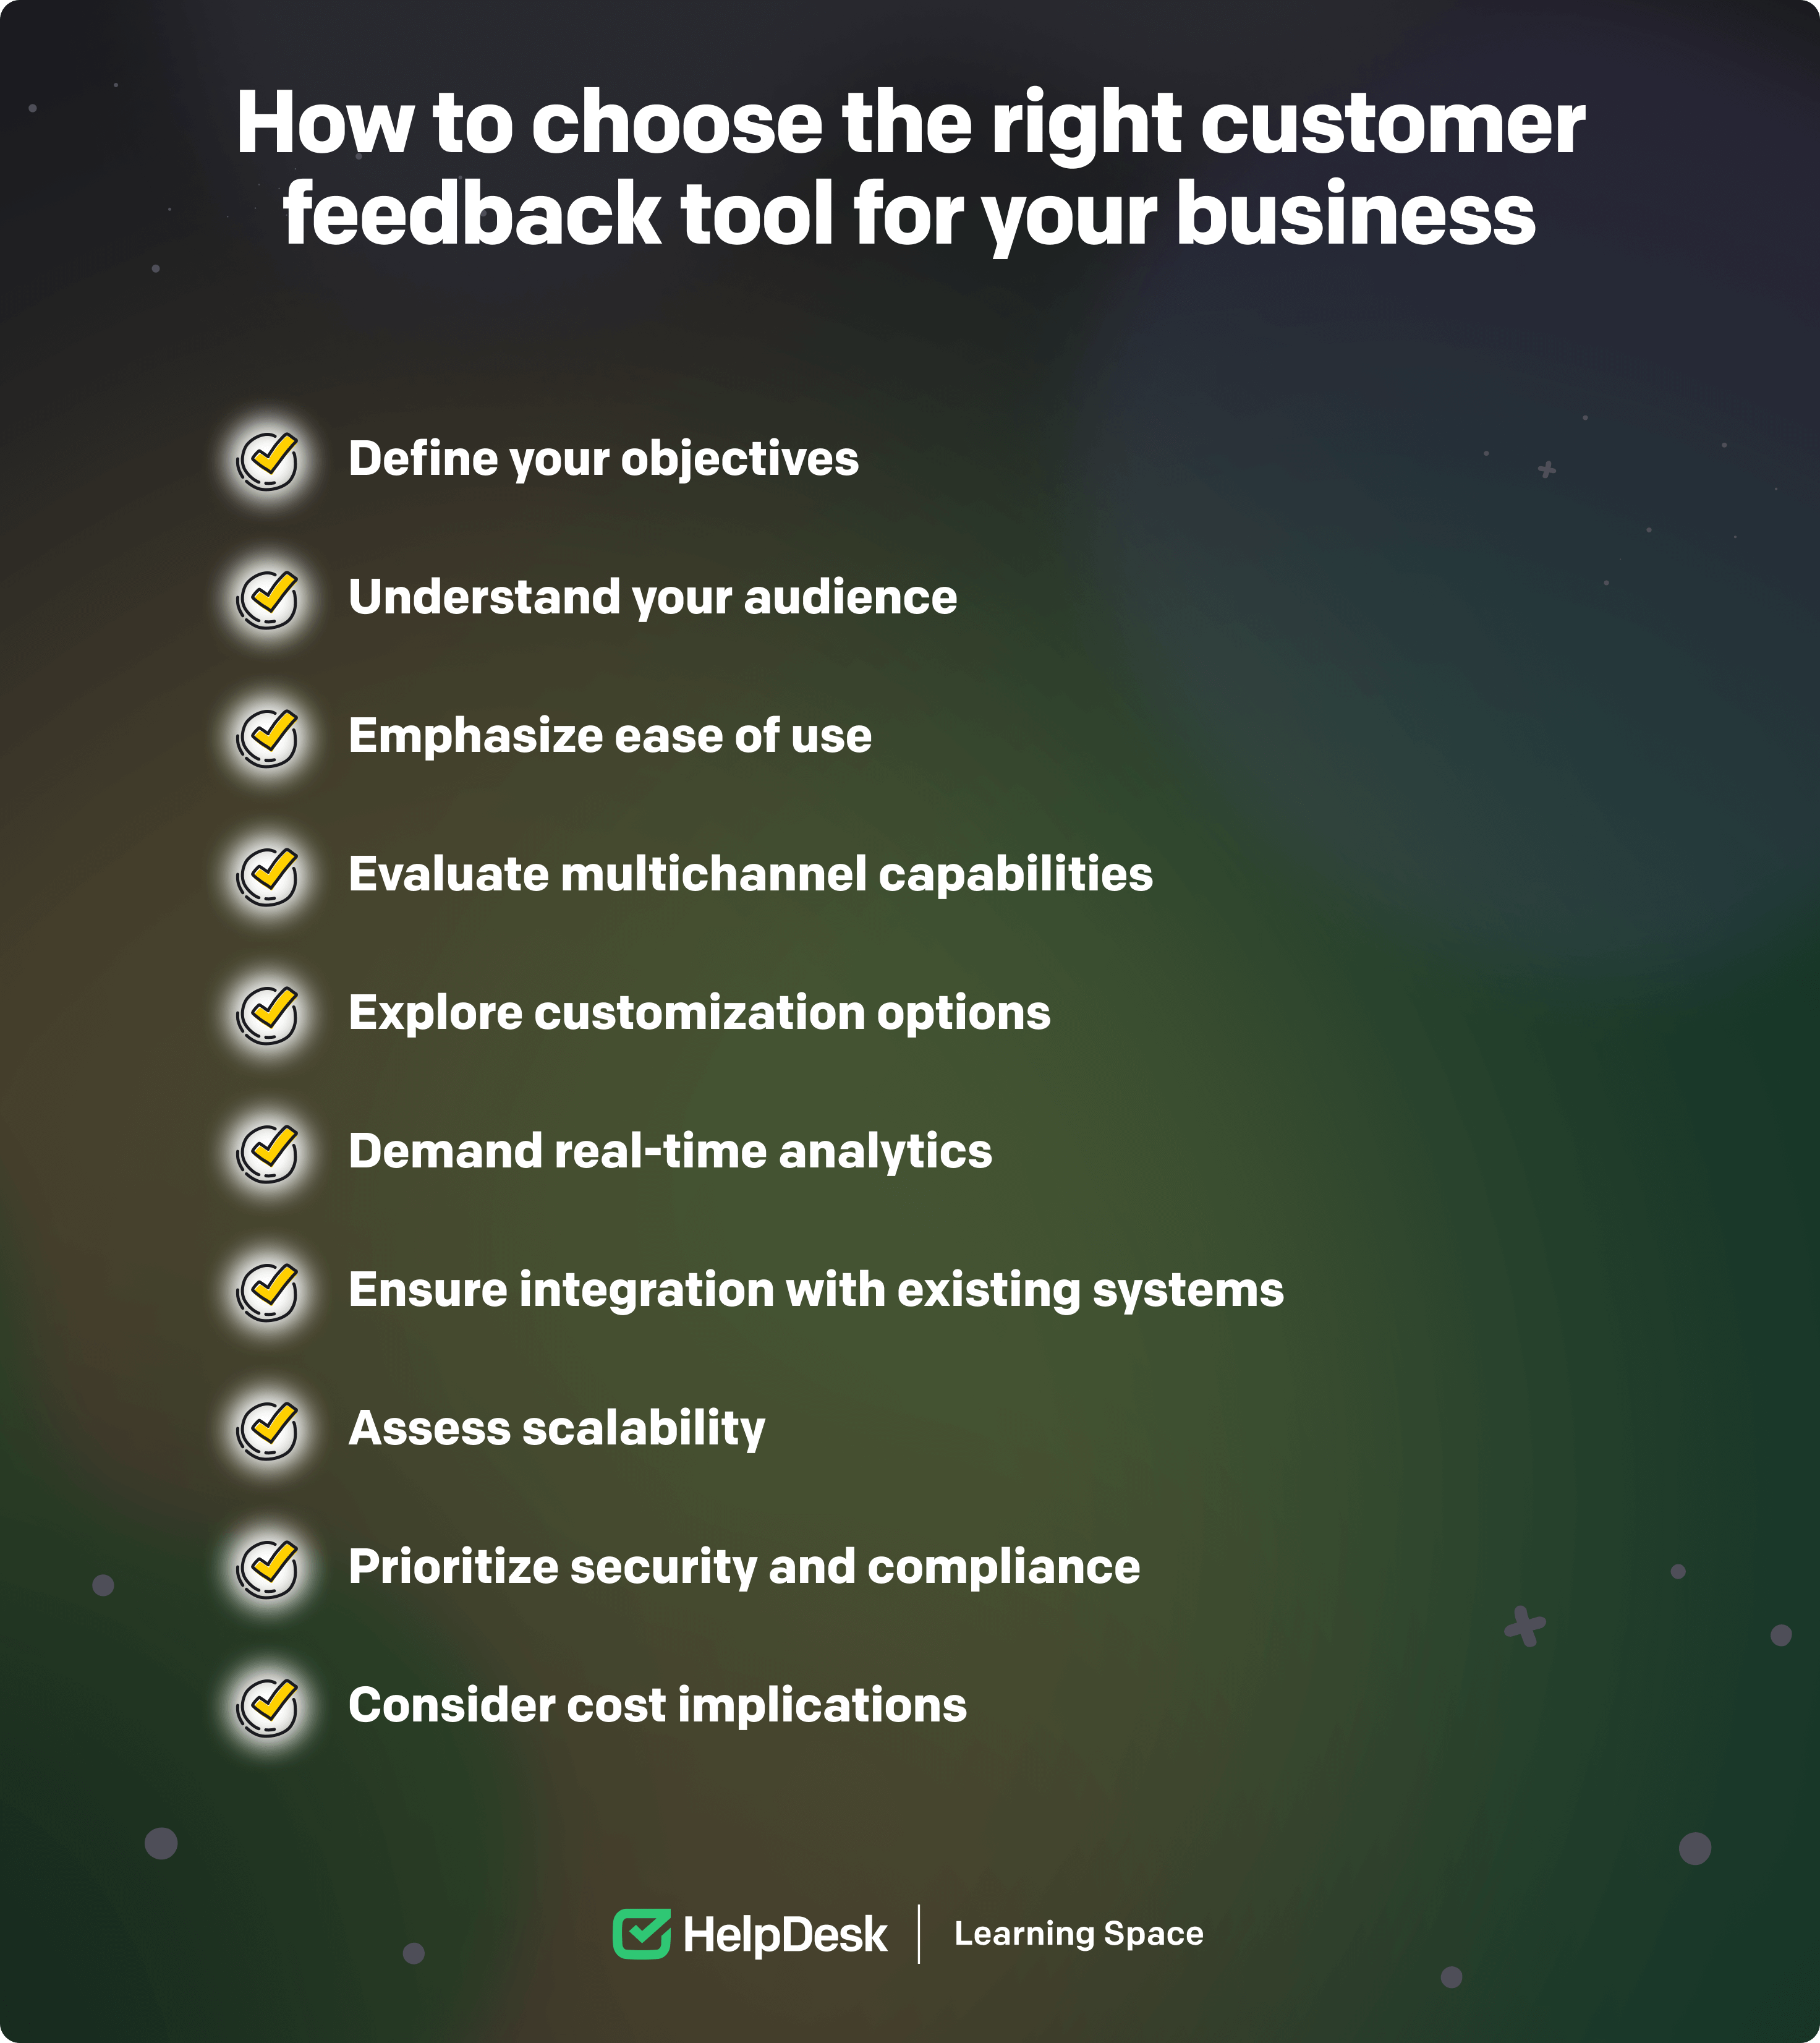 How to choose the right customer feedback tool for your business